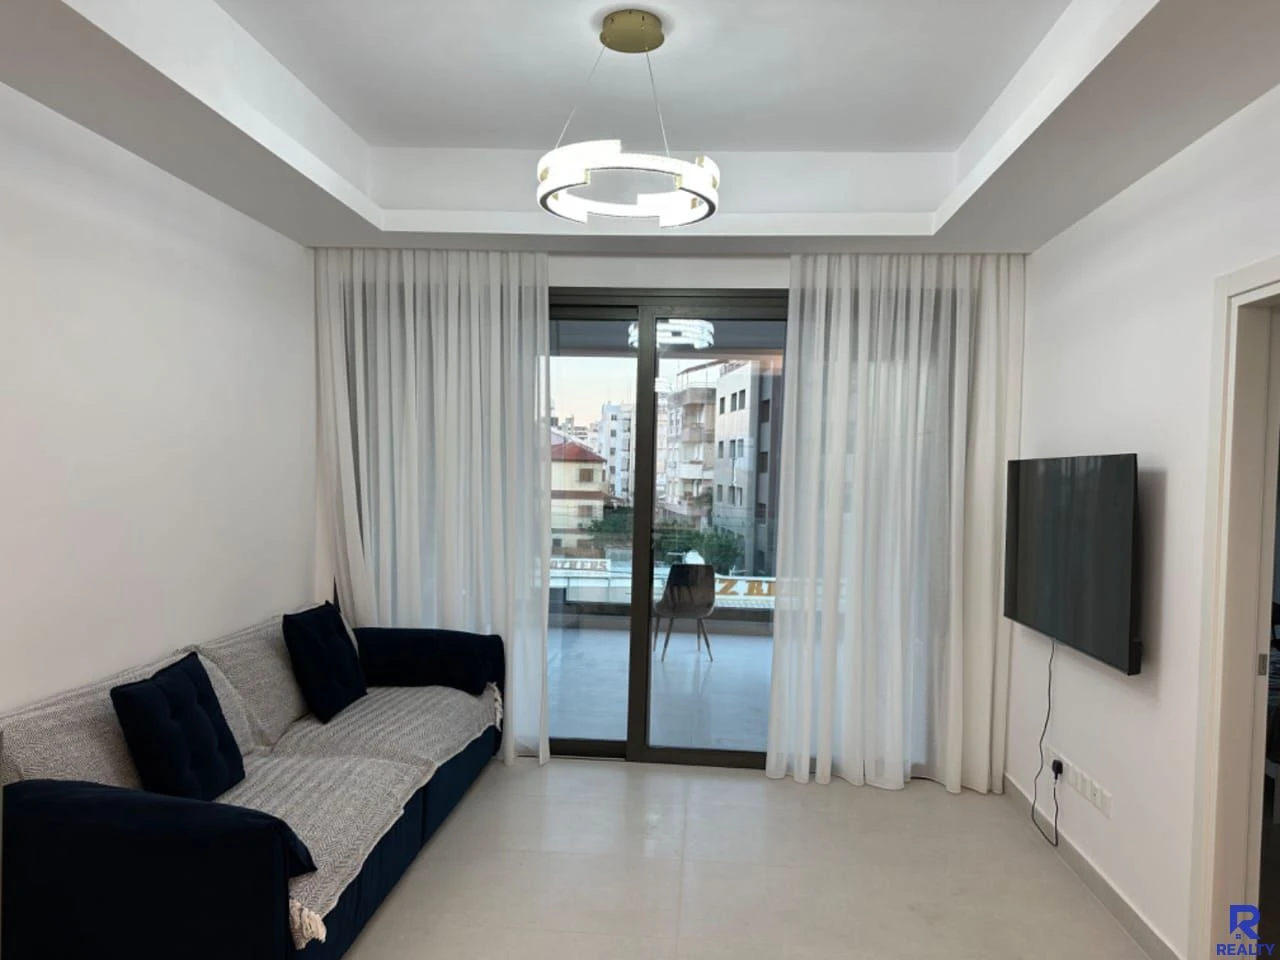 3-bedroom apartment to rent, image 1